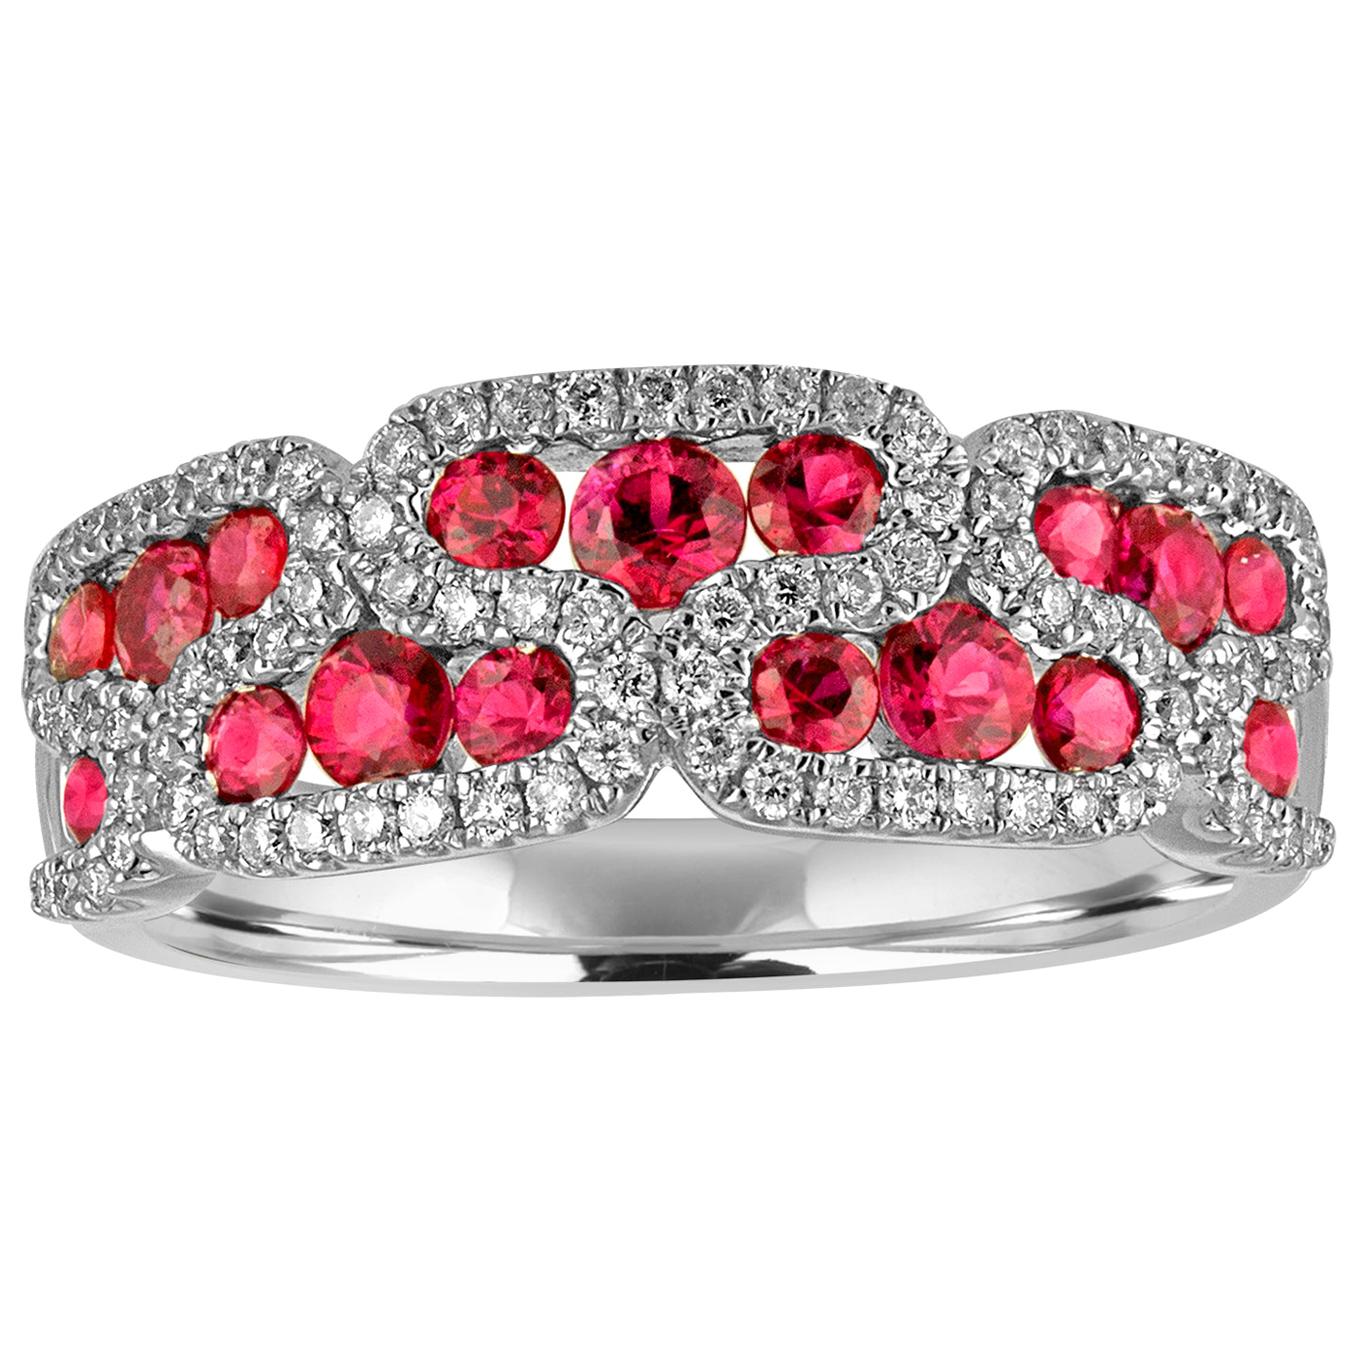 1.28 Carat Ruby and Diamond Gold Band Ring